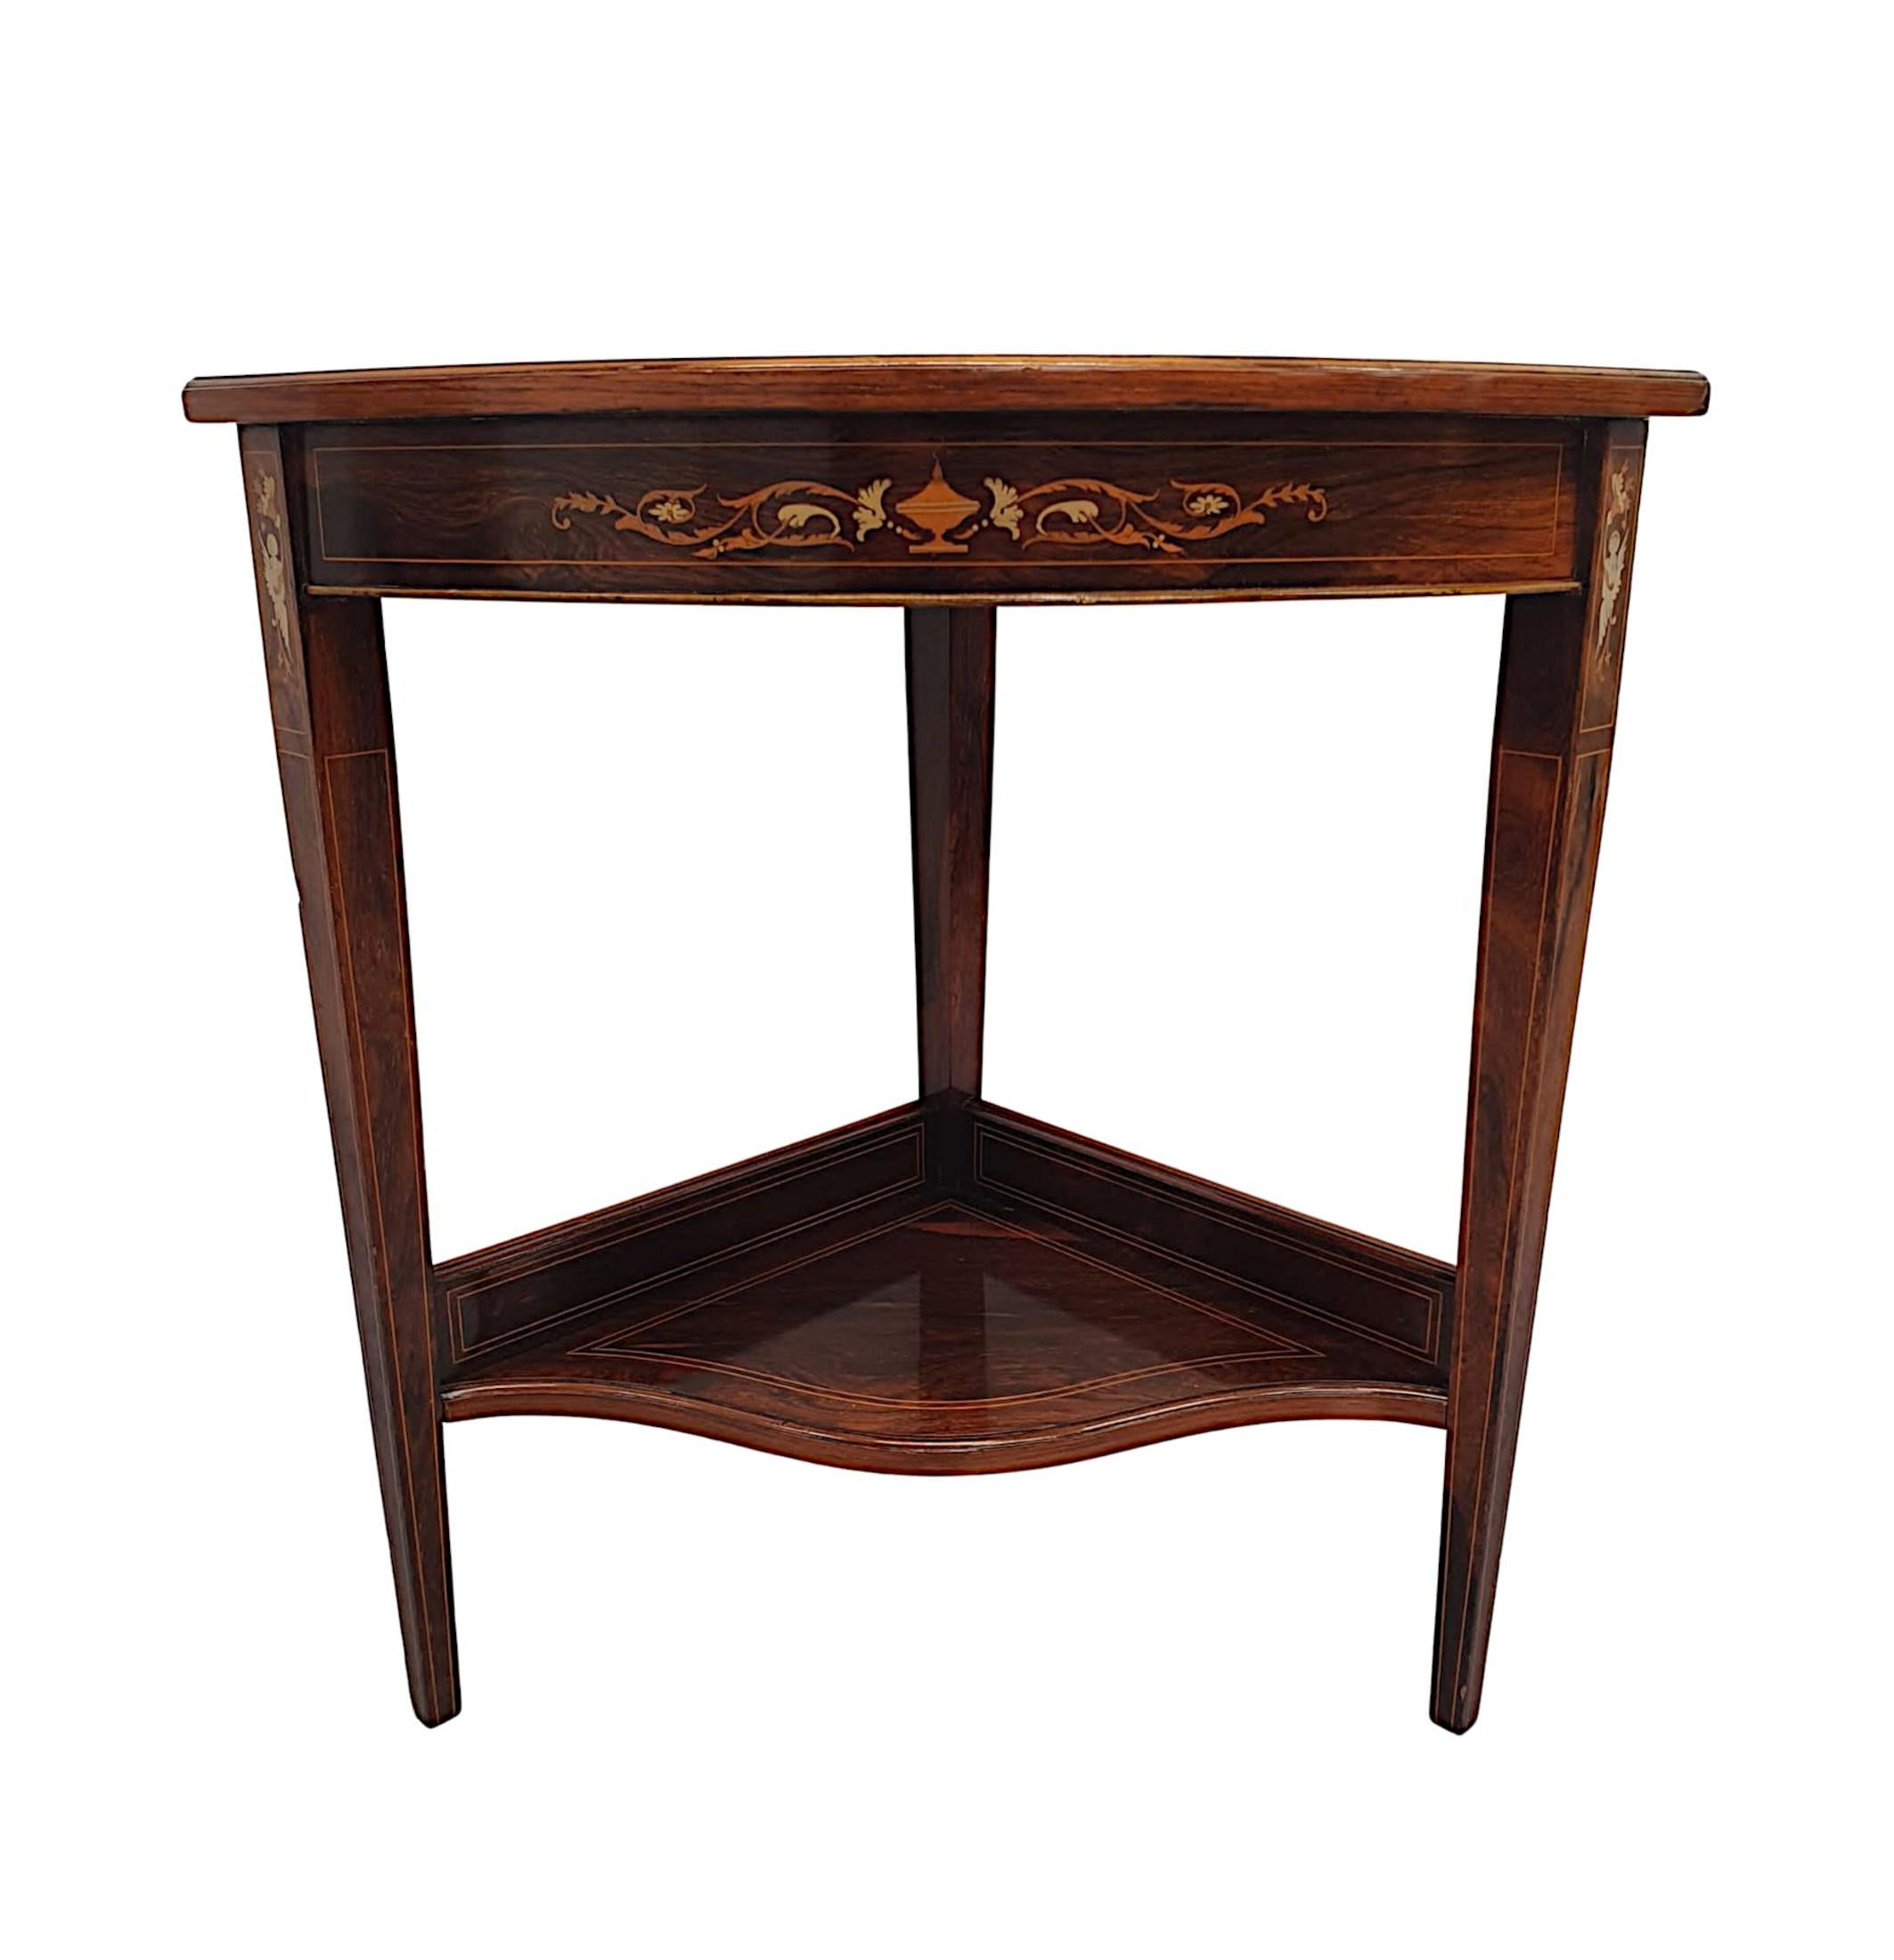 English Gorgeous Edwardian Line Inlaid Marquetry Corner Table For Sale